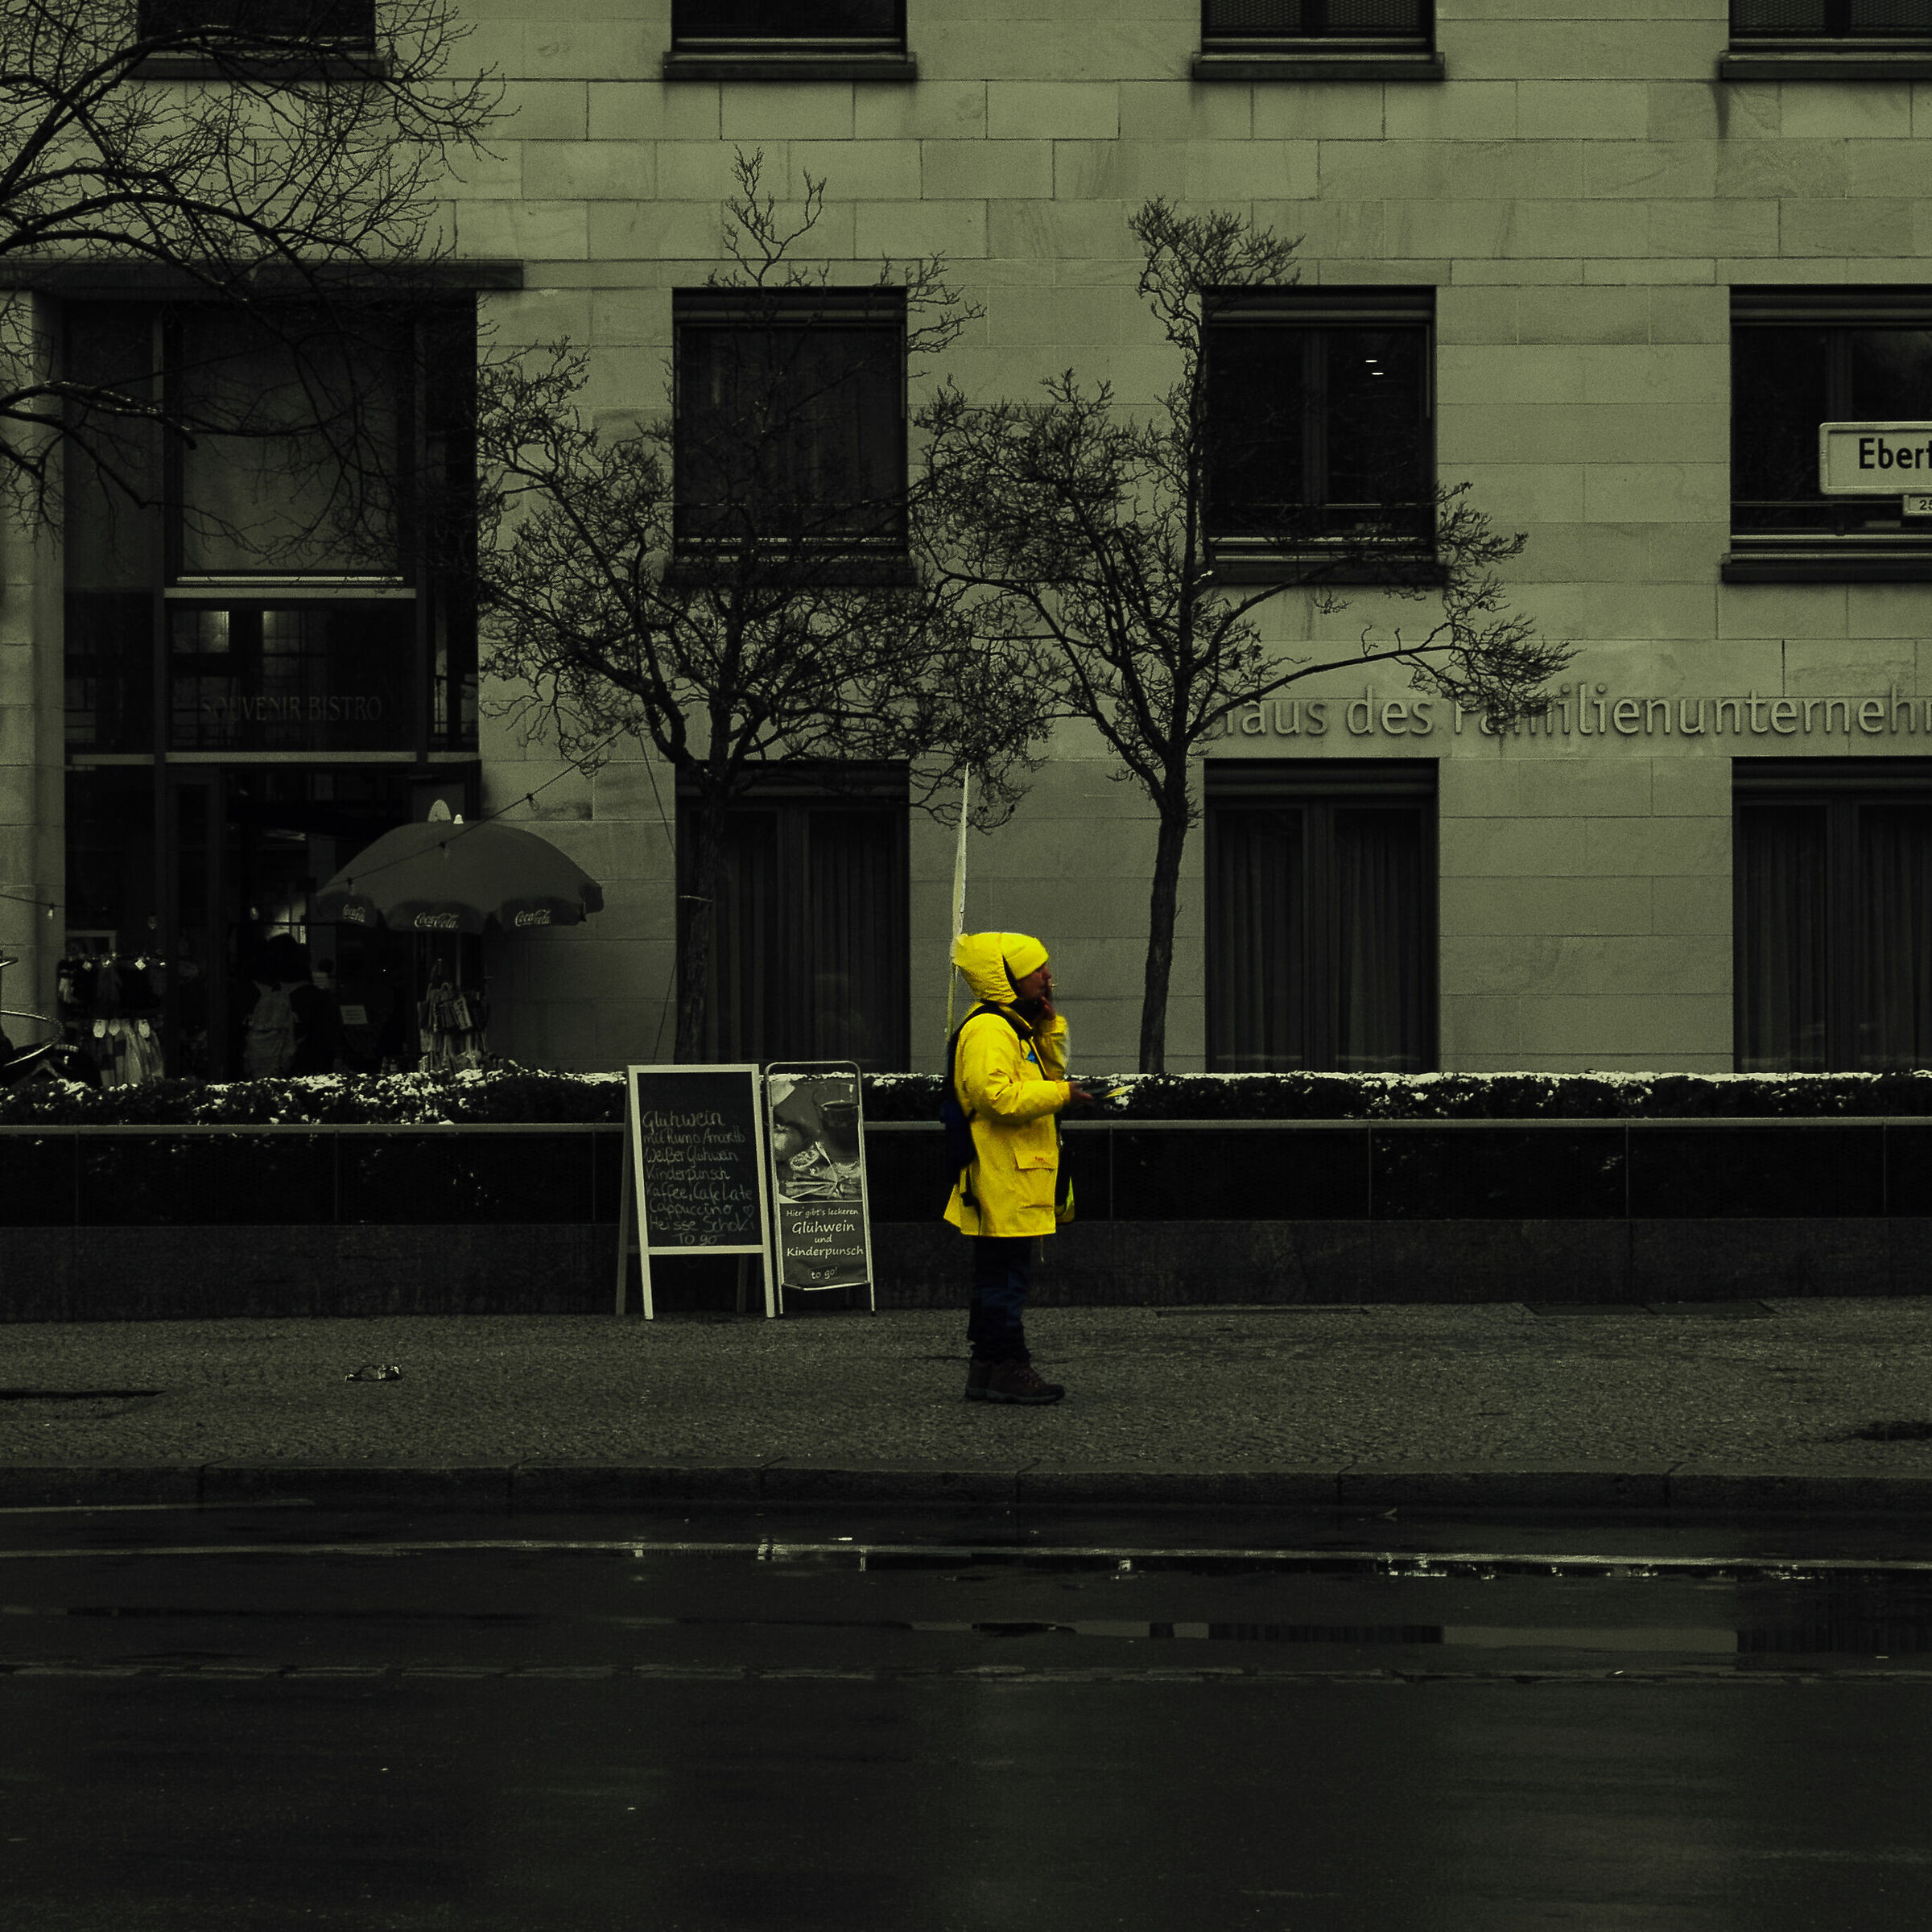 The man in yellow...